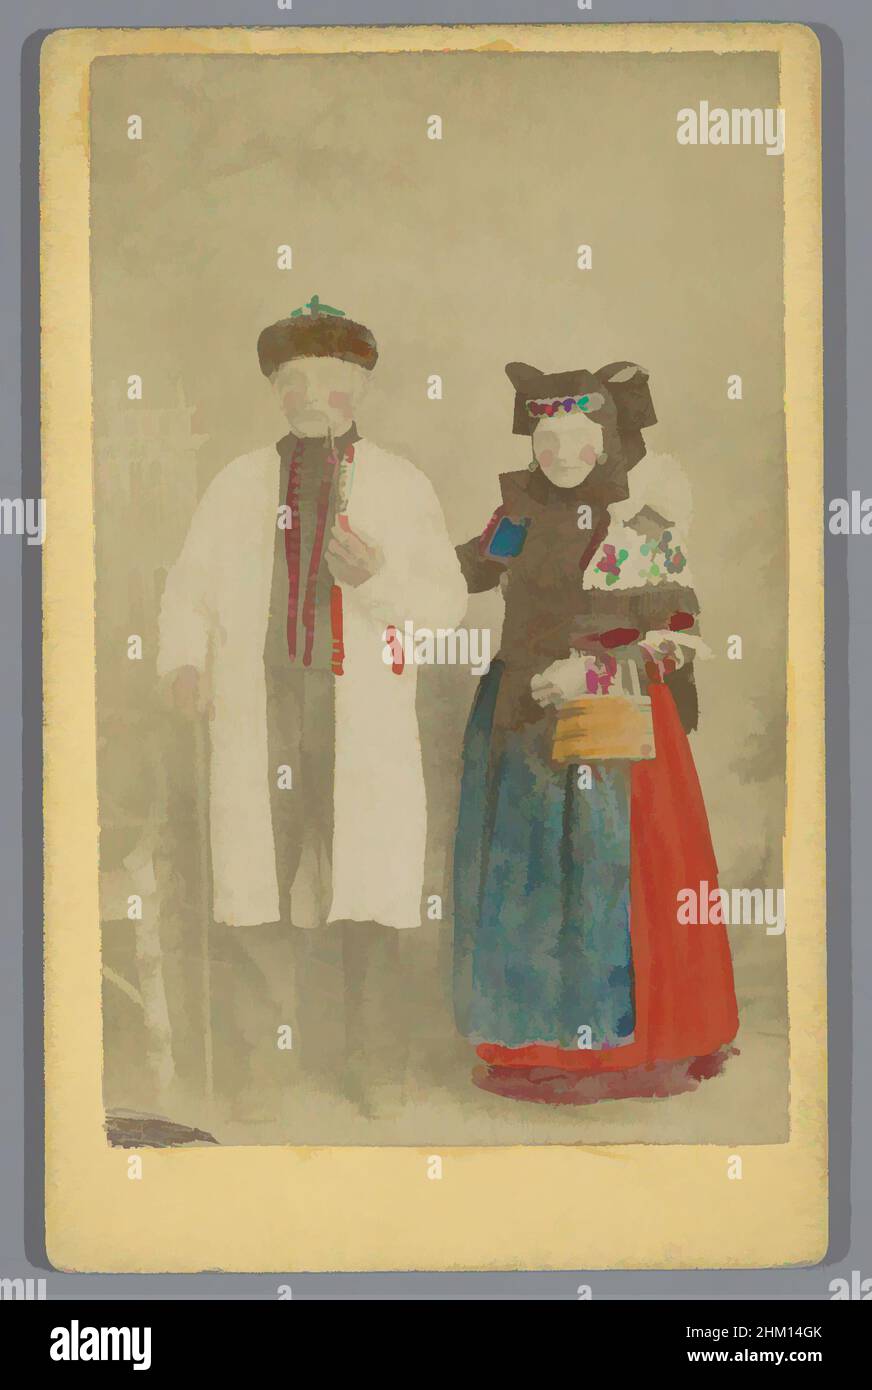 Art inspired by Portrait of an unknown couple in Bückeburger costume, Bückeburger Bauern Ehepaar, Bückeburg, 1854 - 1885, paper, cardboard, albumen print, height 105 mm × width 66 mm, Classic works modernized by Artotop with a splash of modernity. Shapes, color and value, eye-catching visual impact on art. Emotions through freedom of artworks in a contemporary way. A timeless message pursuing a wildly creative new direction. Artists turning to the digital medium and creating the Artotop NFT Stock Photo